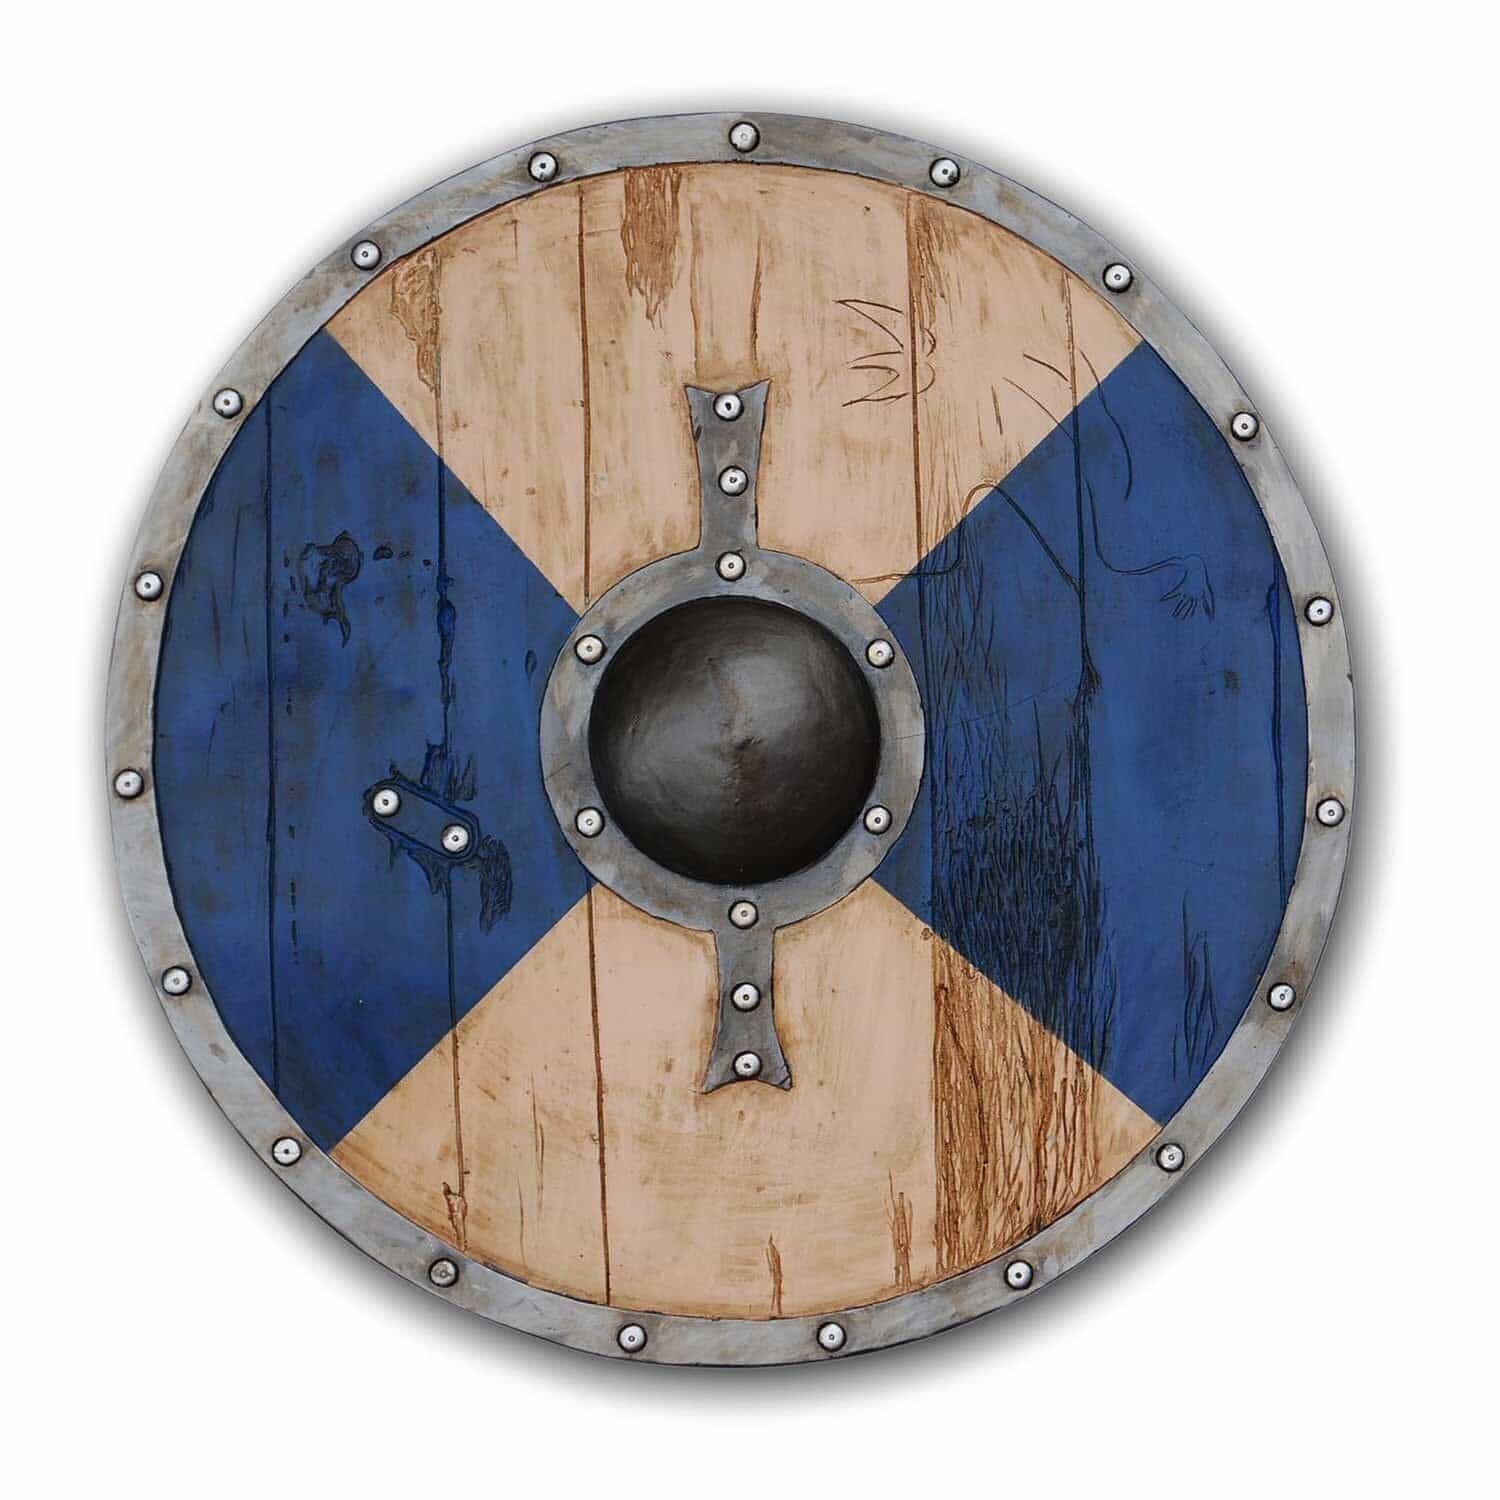 Viking Age Round Shield for Cosplay or Costumes – 24″ Full Size